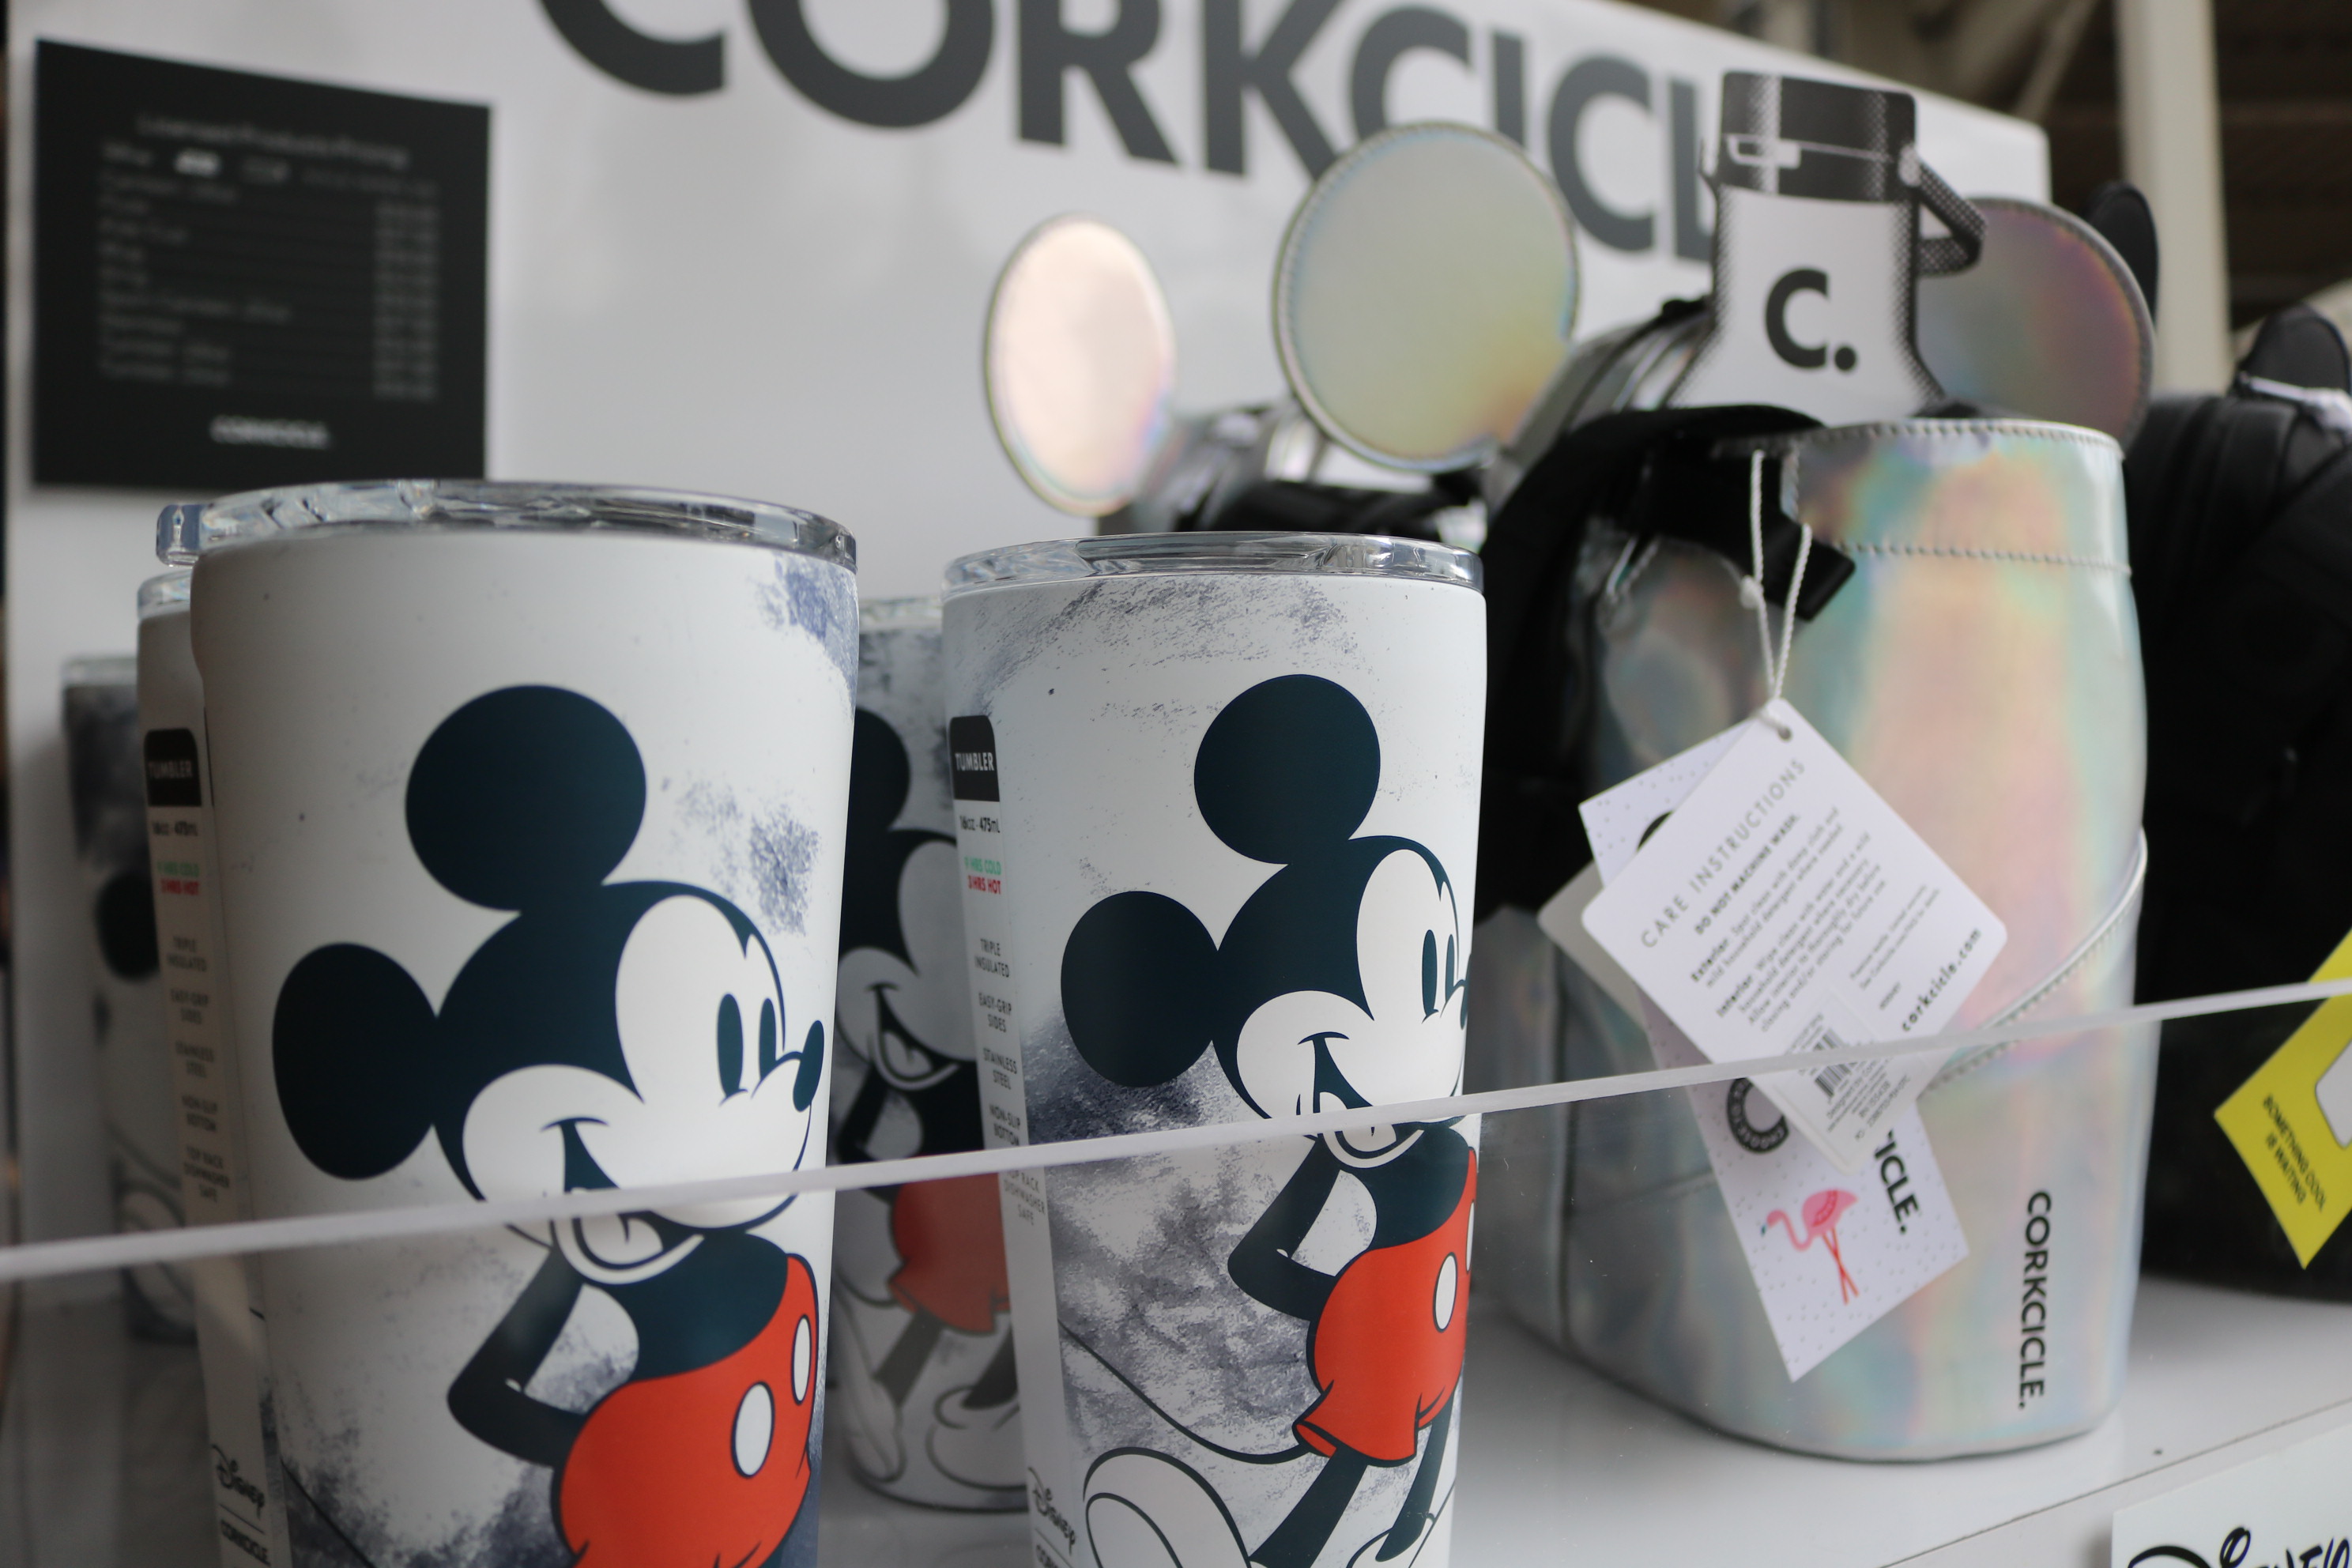 PHOTOS: Disney World Has a NEW 'Star Wars' Corkcicle Collection